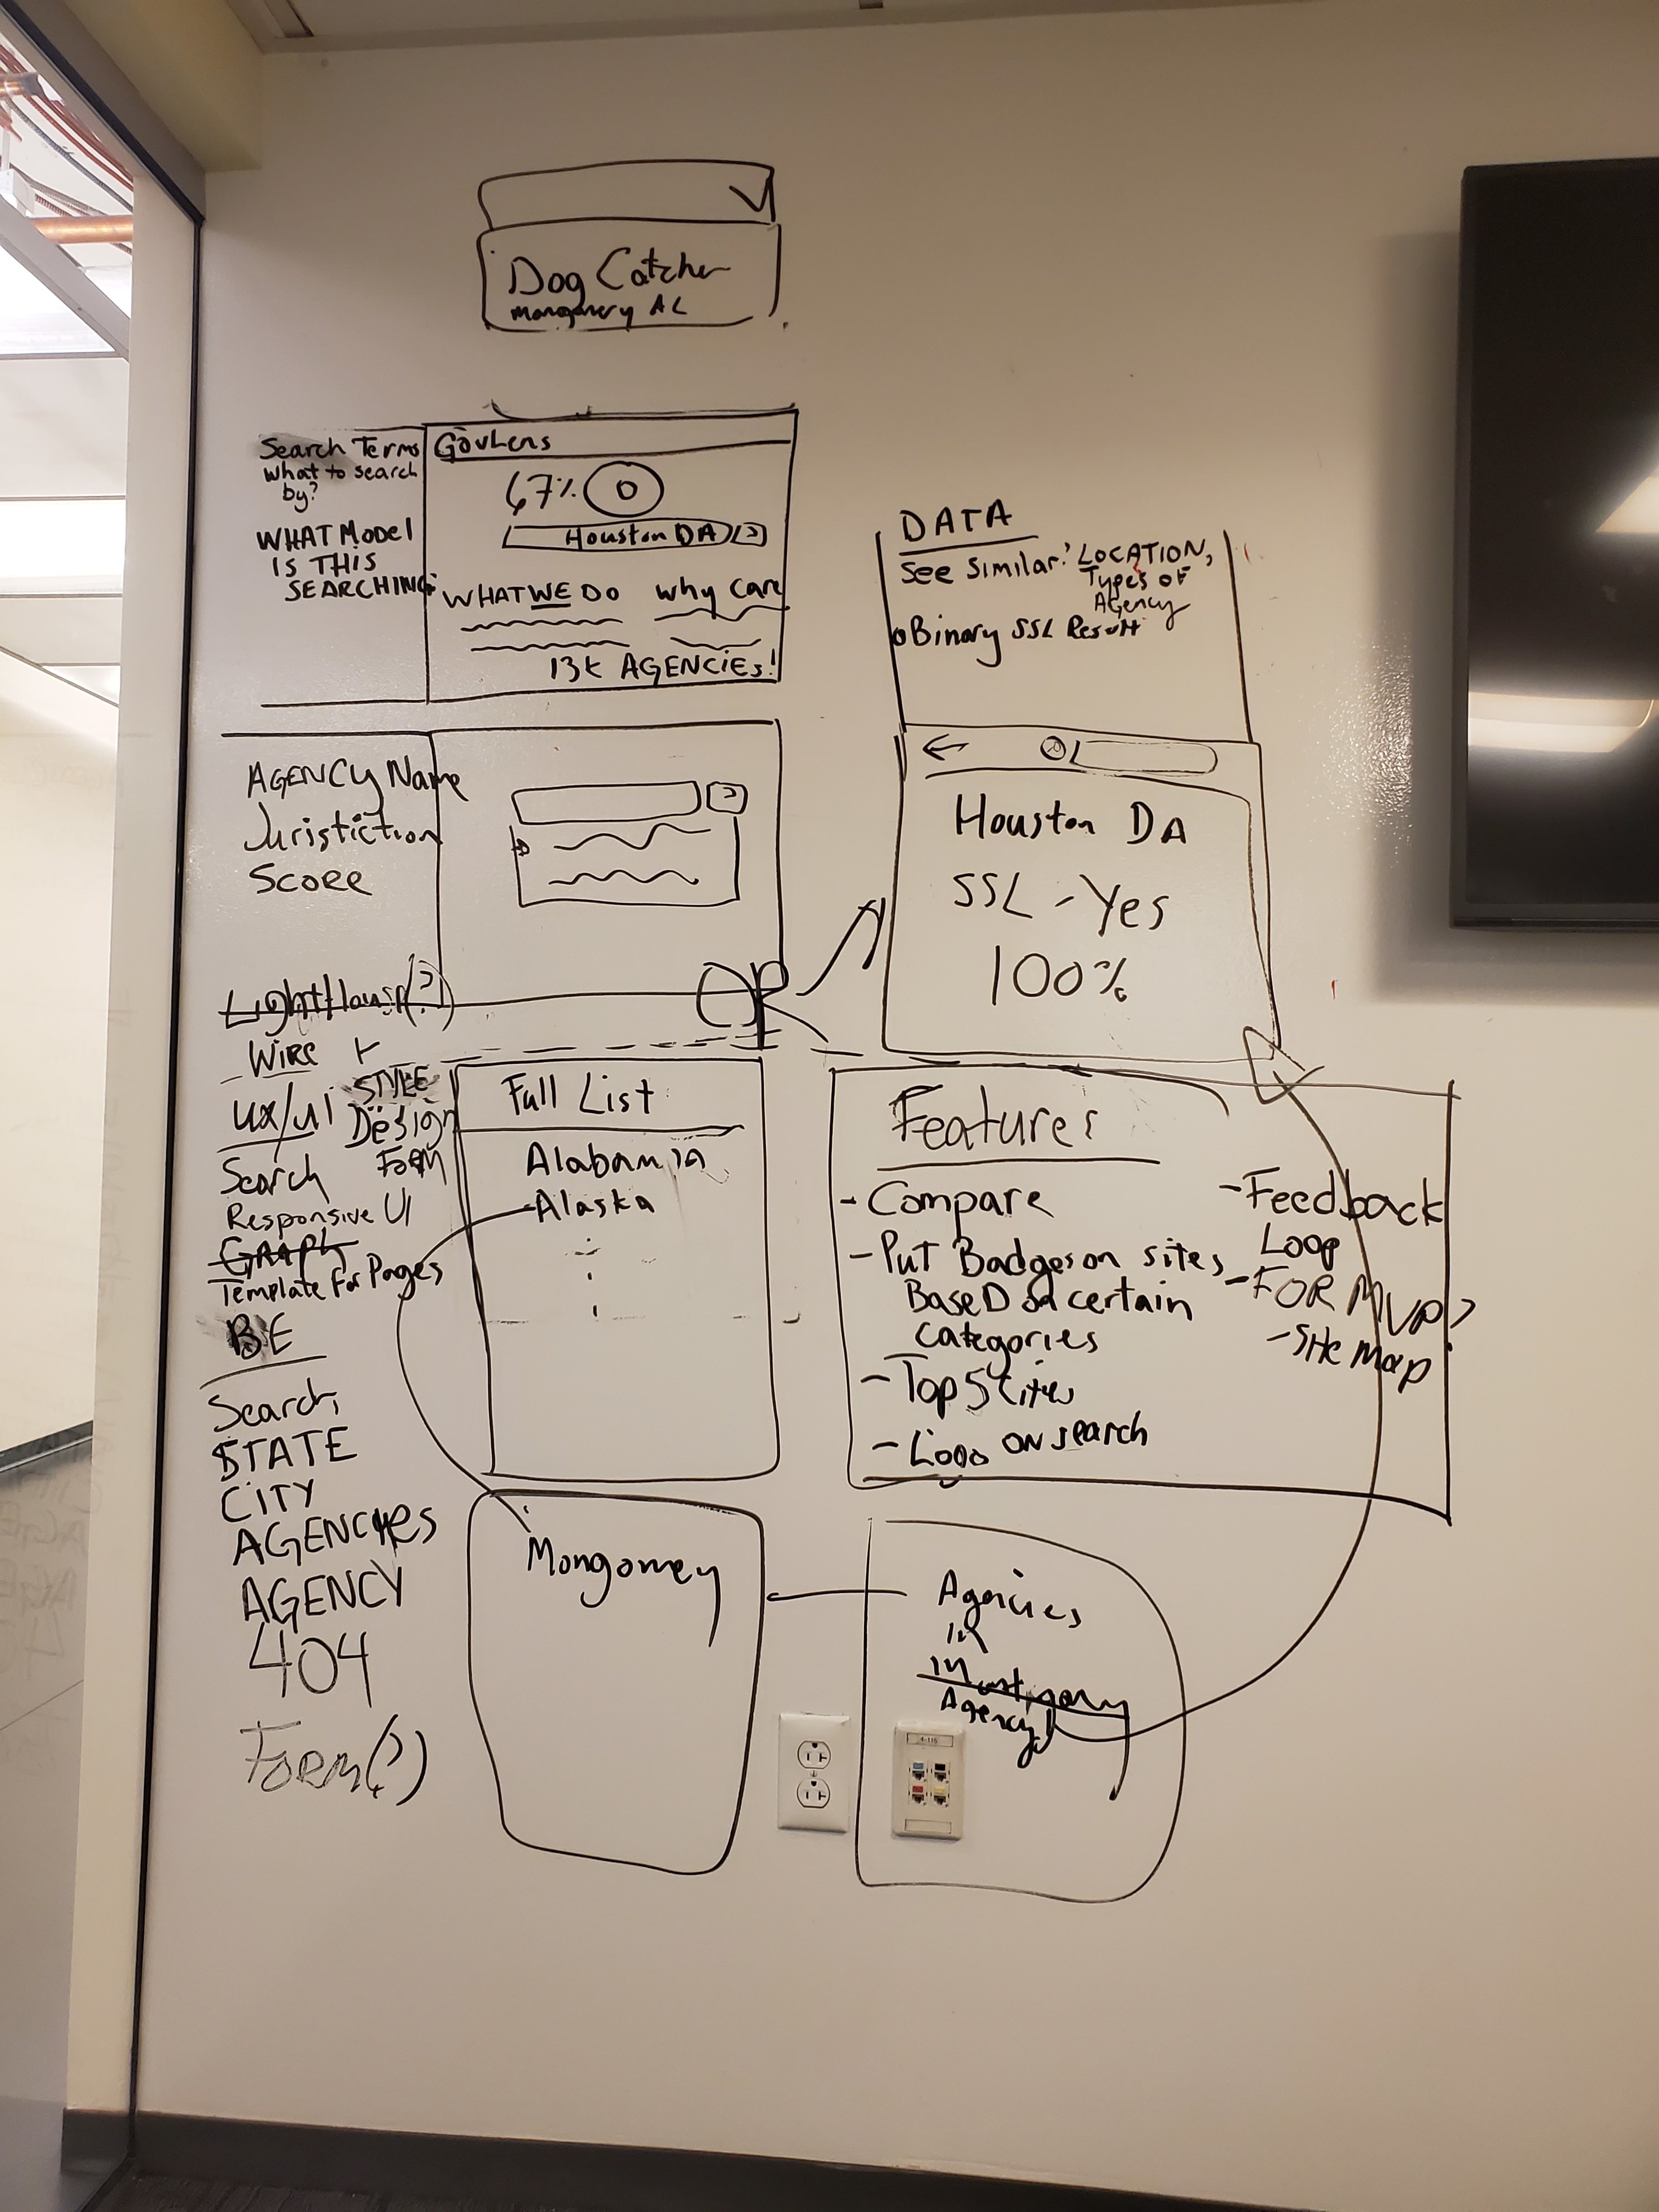 A sketch on a wall of a list of features that need to get for GovLens, with the features available for view at https://github.com/codeforboston/govlens/issues